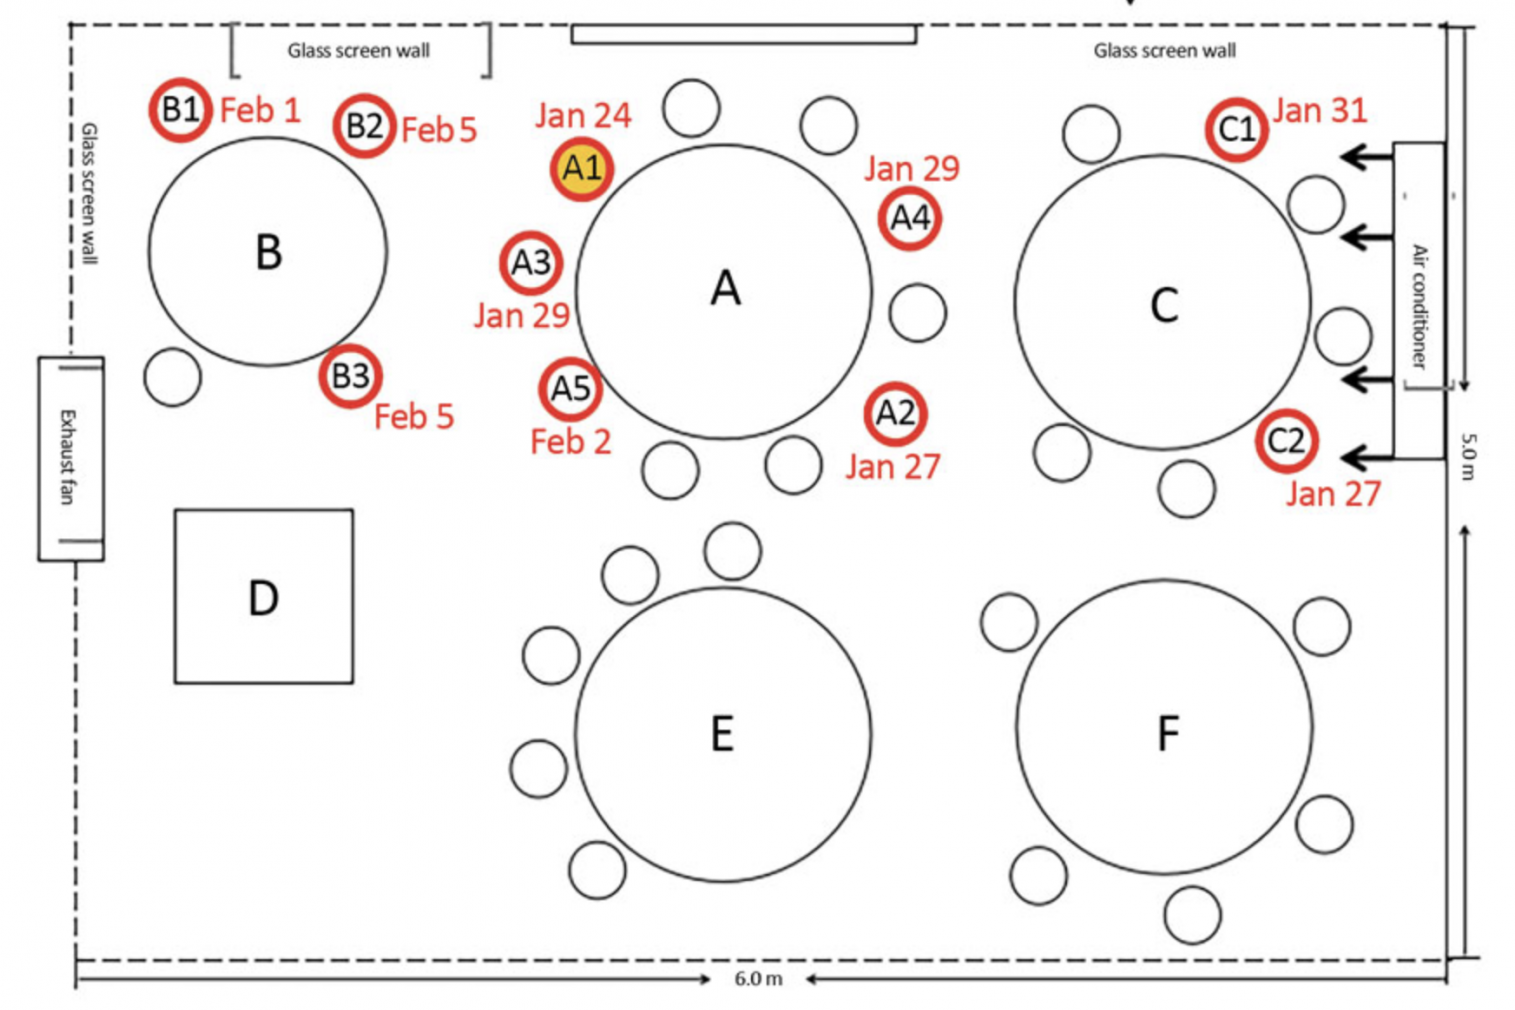 Sketch showing arrangement of restaurant tables and air conditioning airflow at site of outbreak of 2019 novel coronavirus disease, Guangzhou, China, 2020. Red circles indicate seating of future case-patients; yellow-filled red circle indicates index case-patient